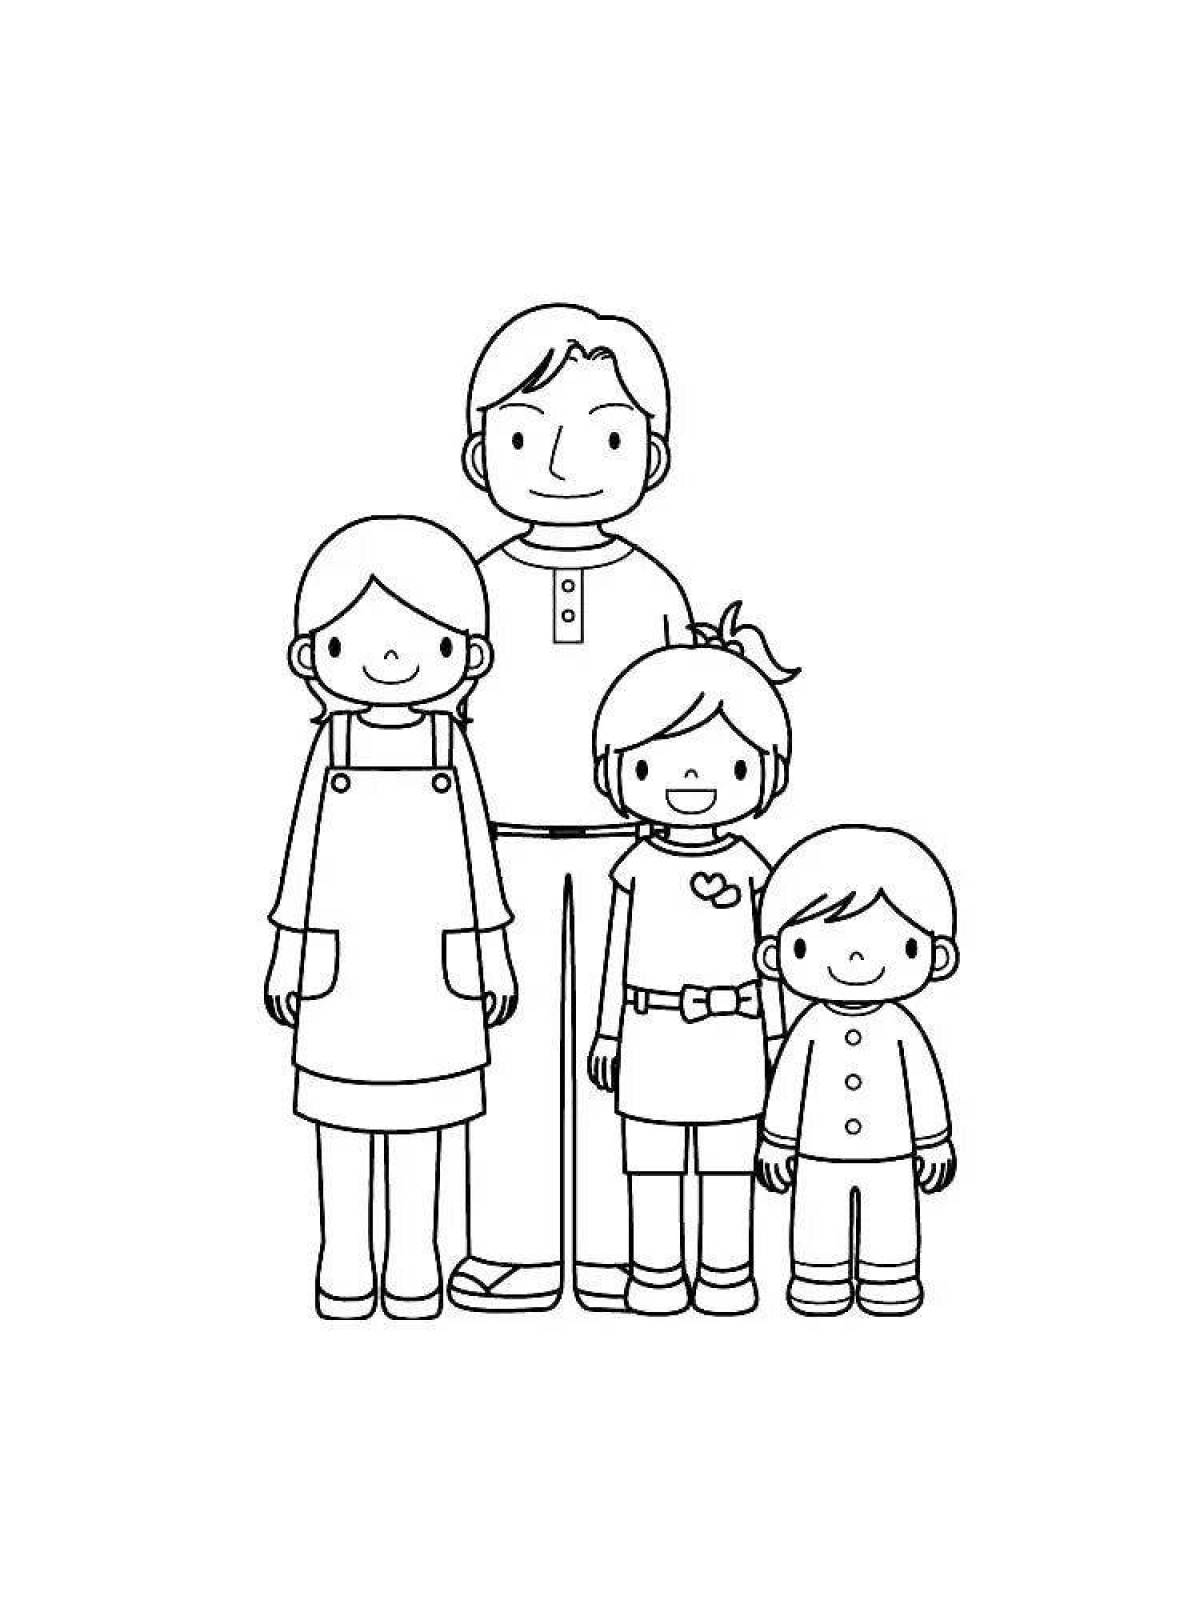 Playful coloring of a family of 4